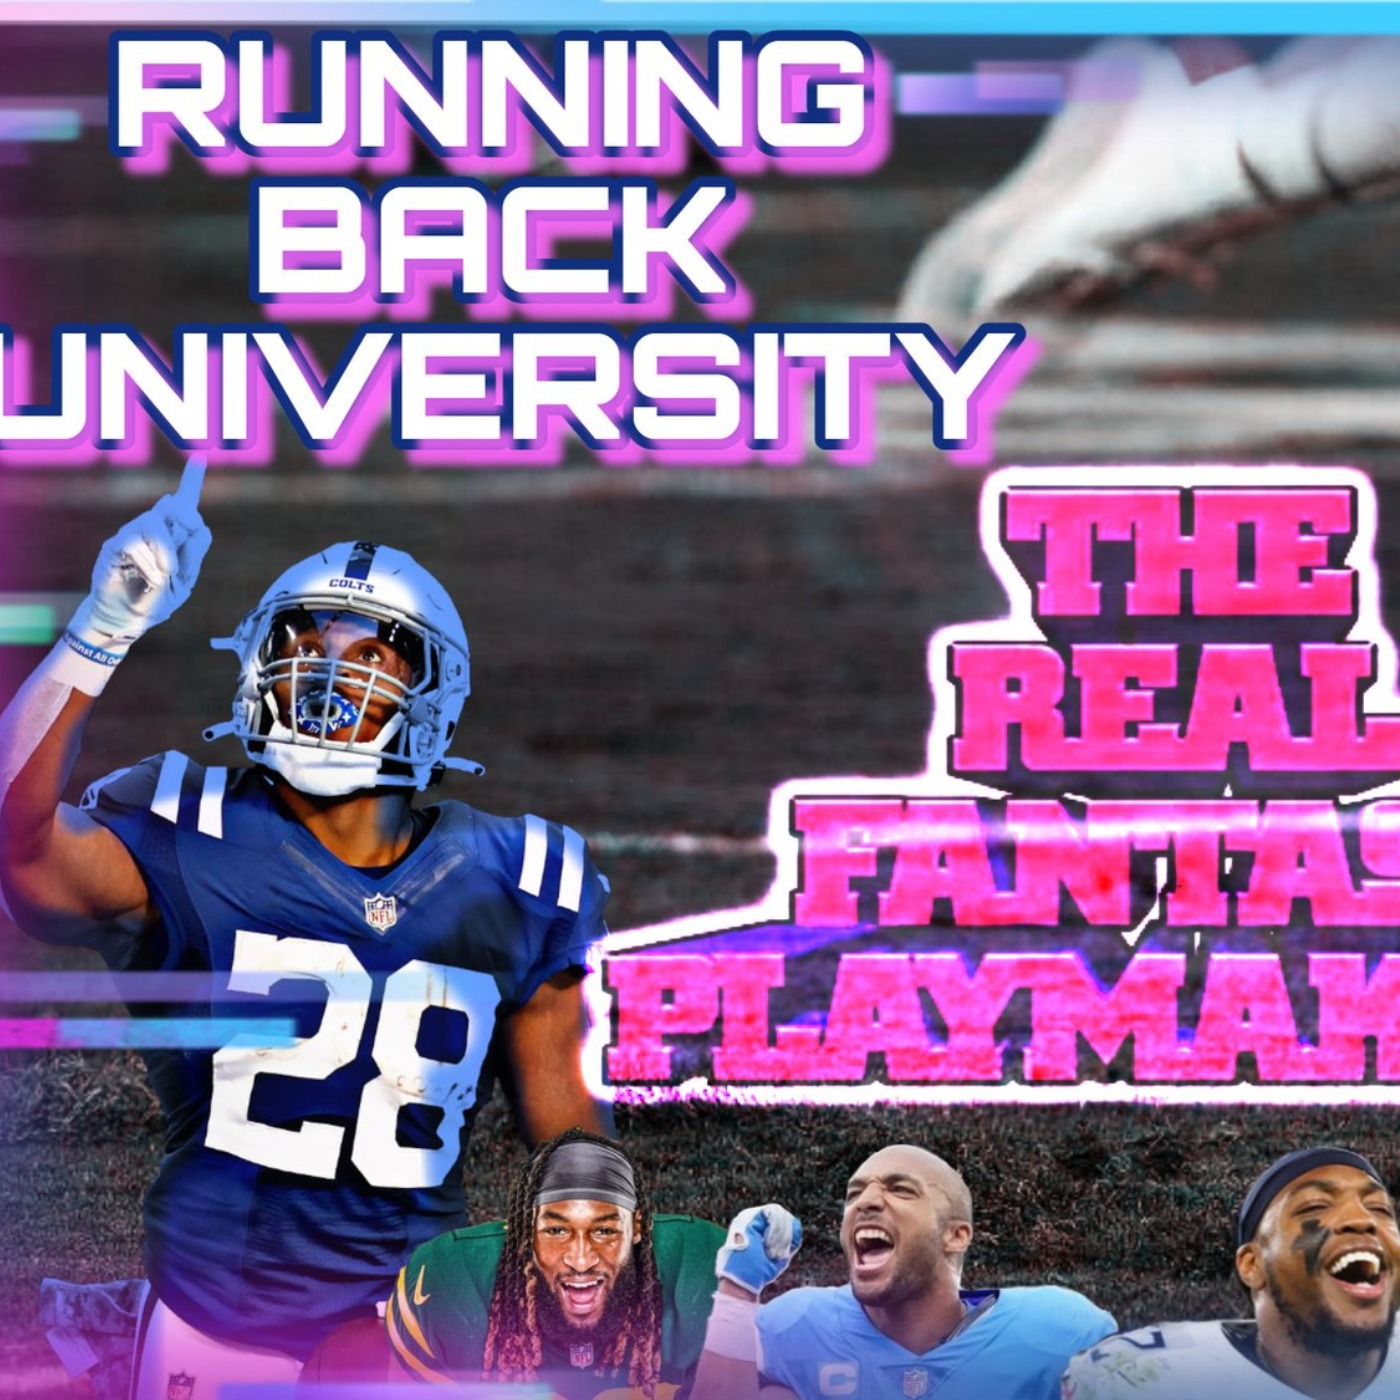 RB University | Fantasy Football What's More Likely? Image